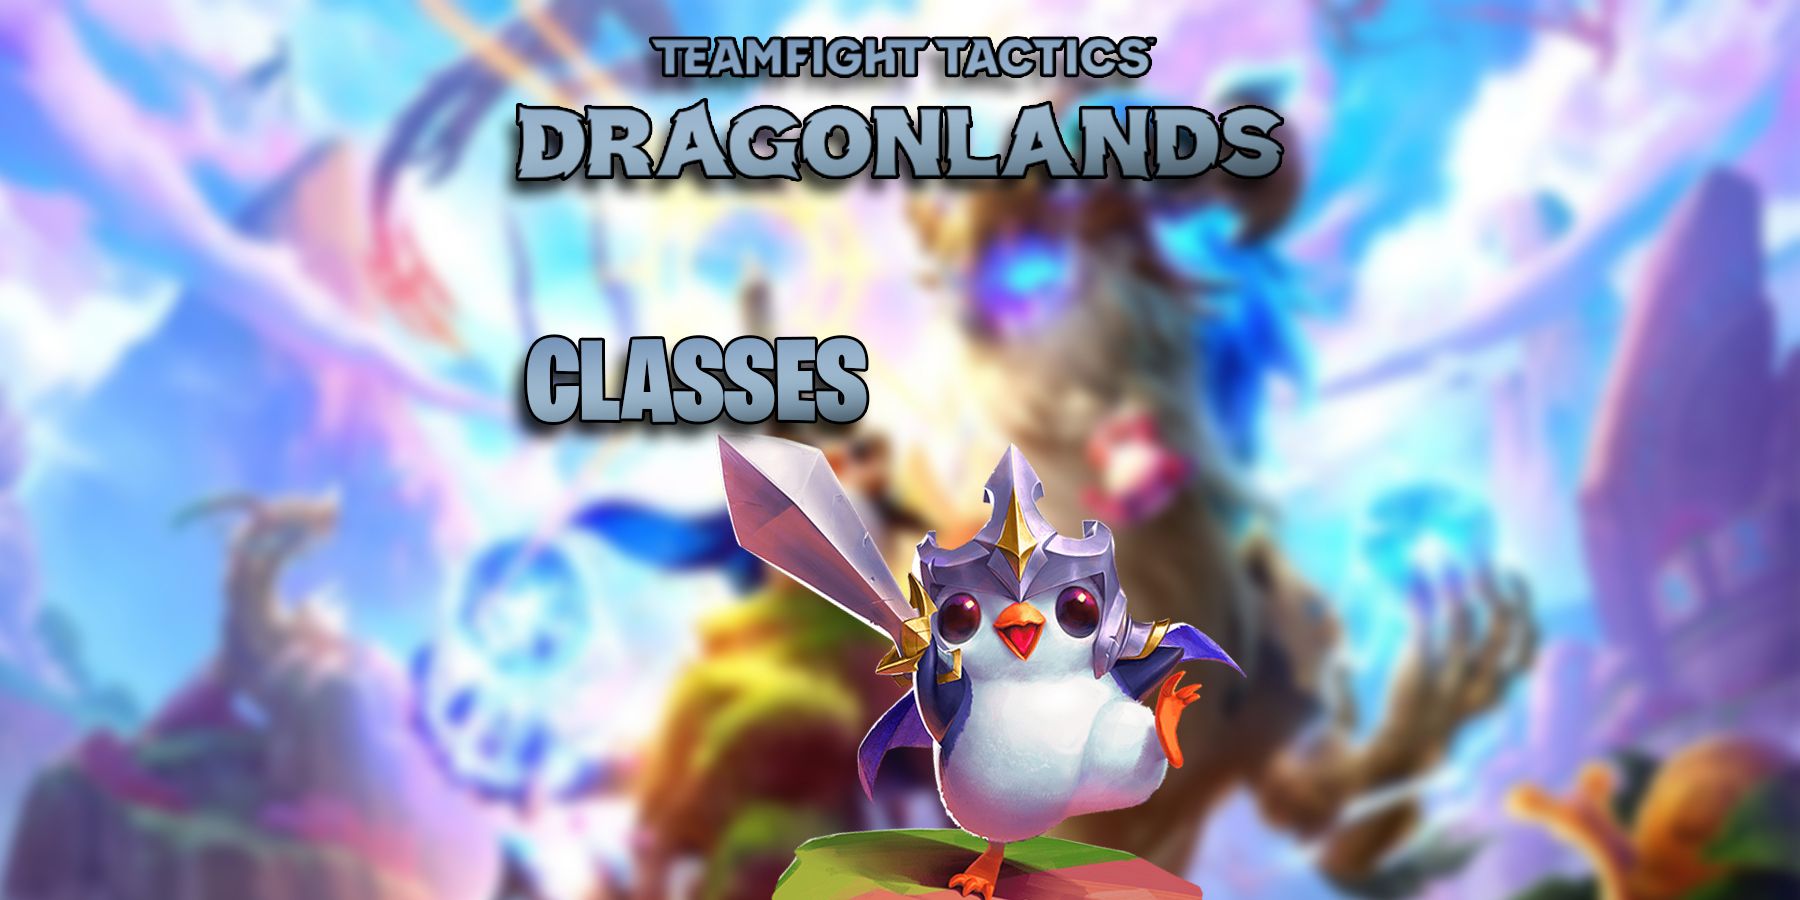 Teamfight Tactics Dragonlands - All Class Traits Explained Guide Header Image